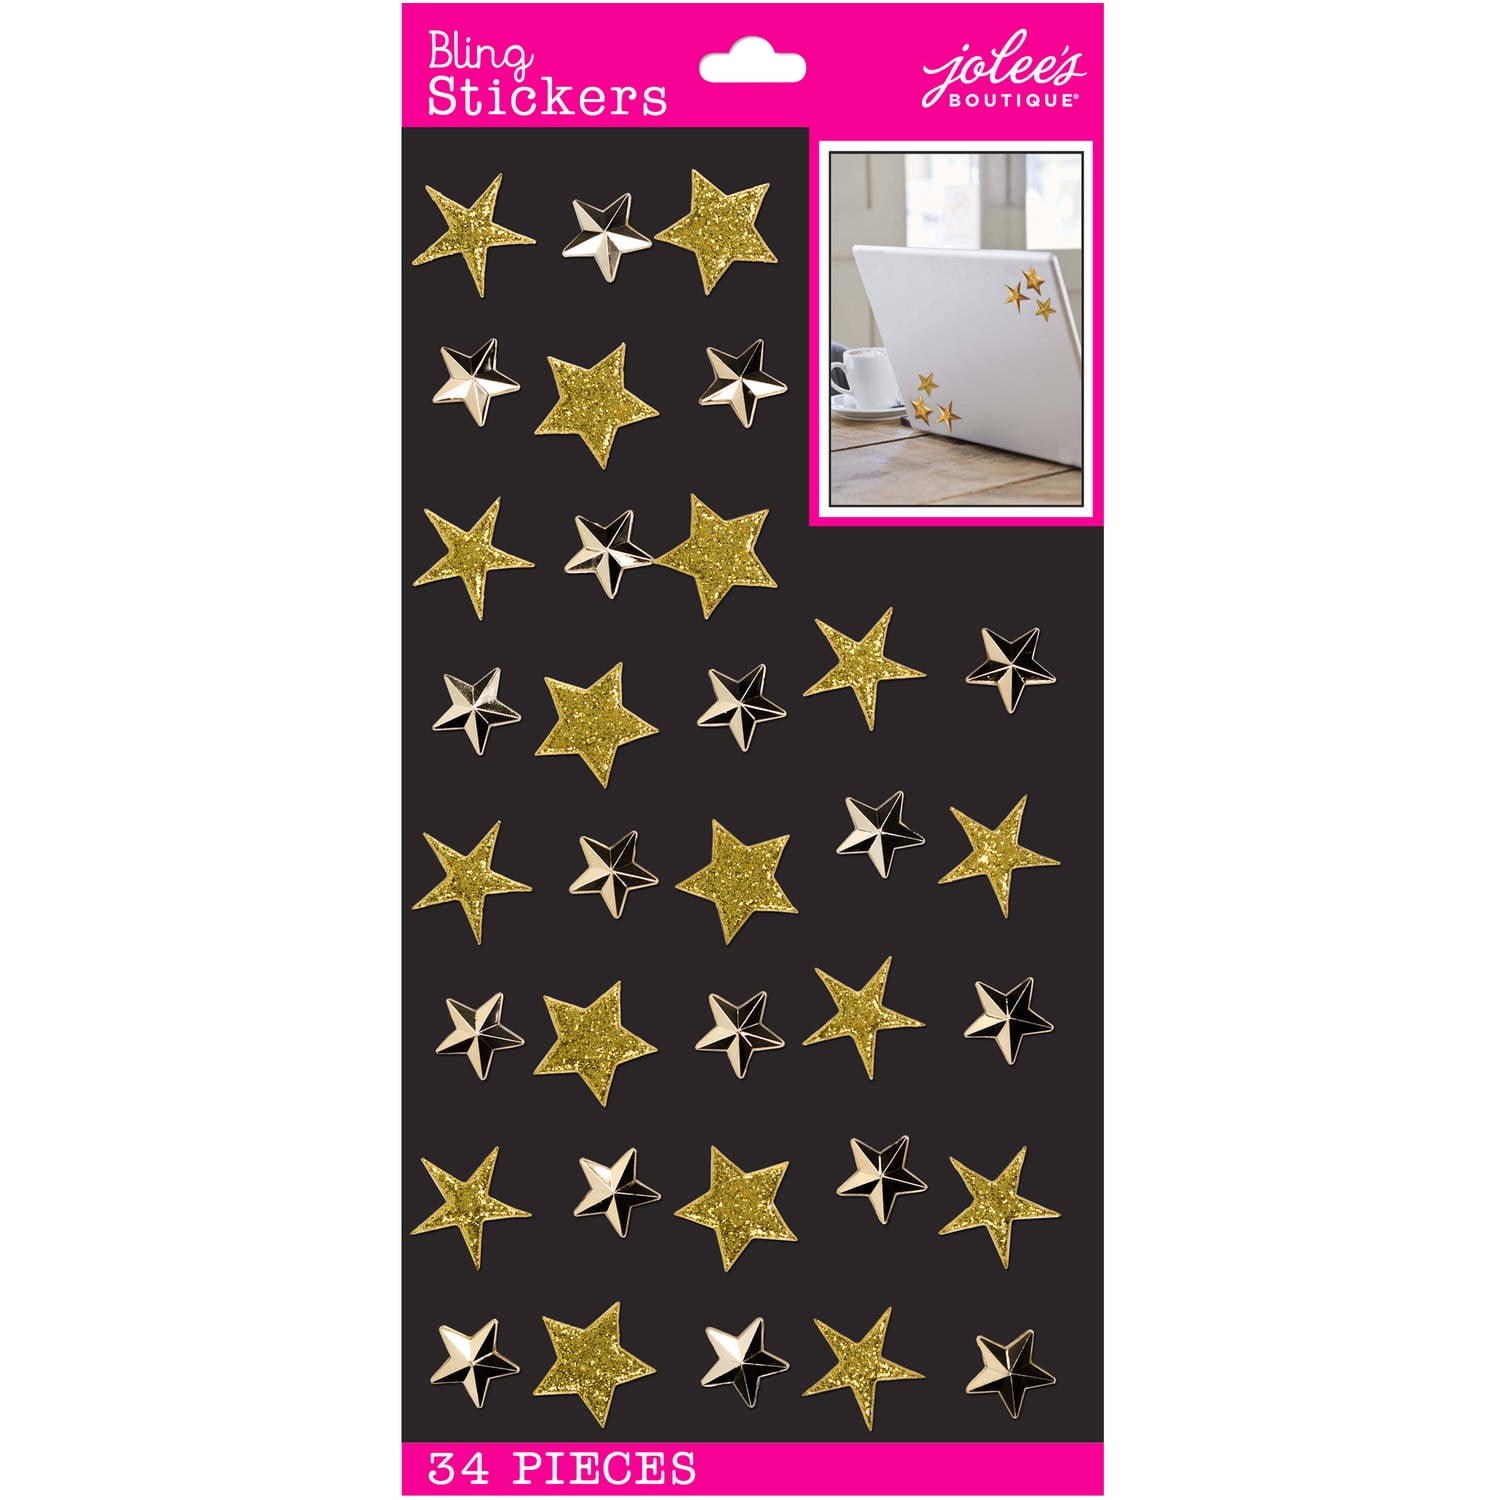 Jolee's Boutique Dimensional Stickers Repeats Cupcakes